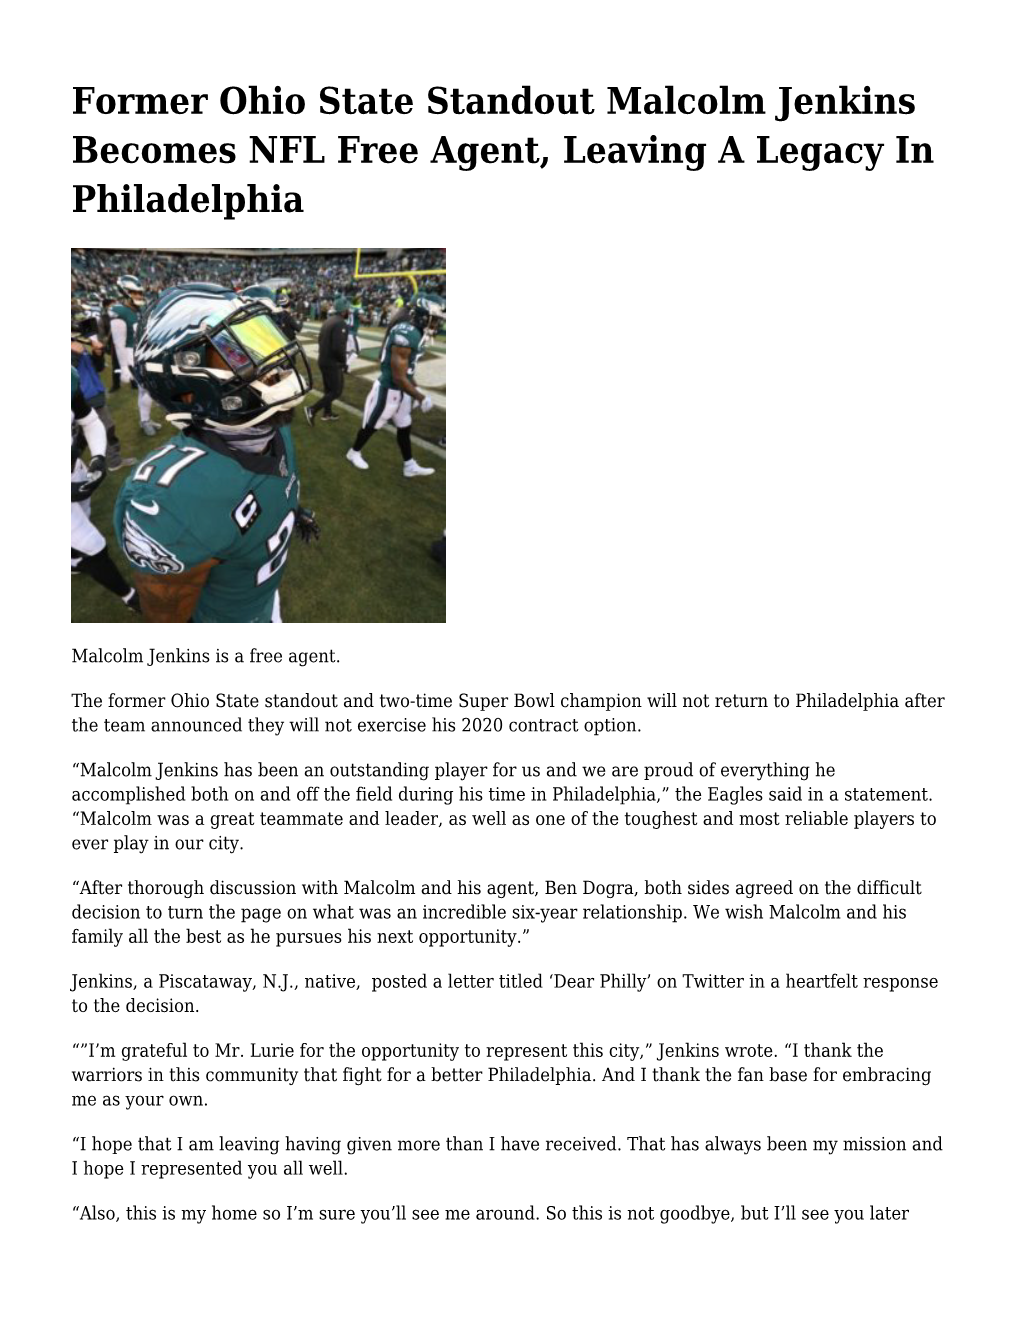 Former Ohio State Standout Malcolm Jenkins Becomes NFL Free Agent, Leaving a Legacy in Philadelphia